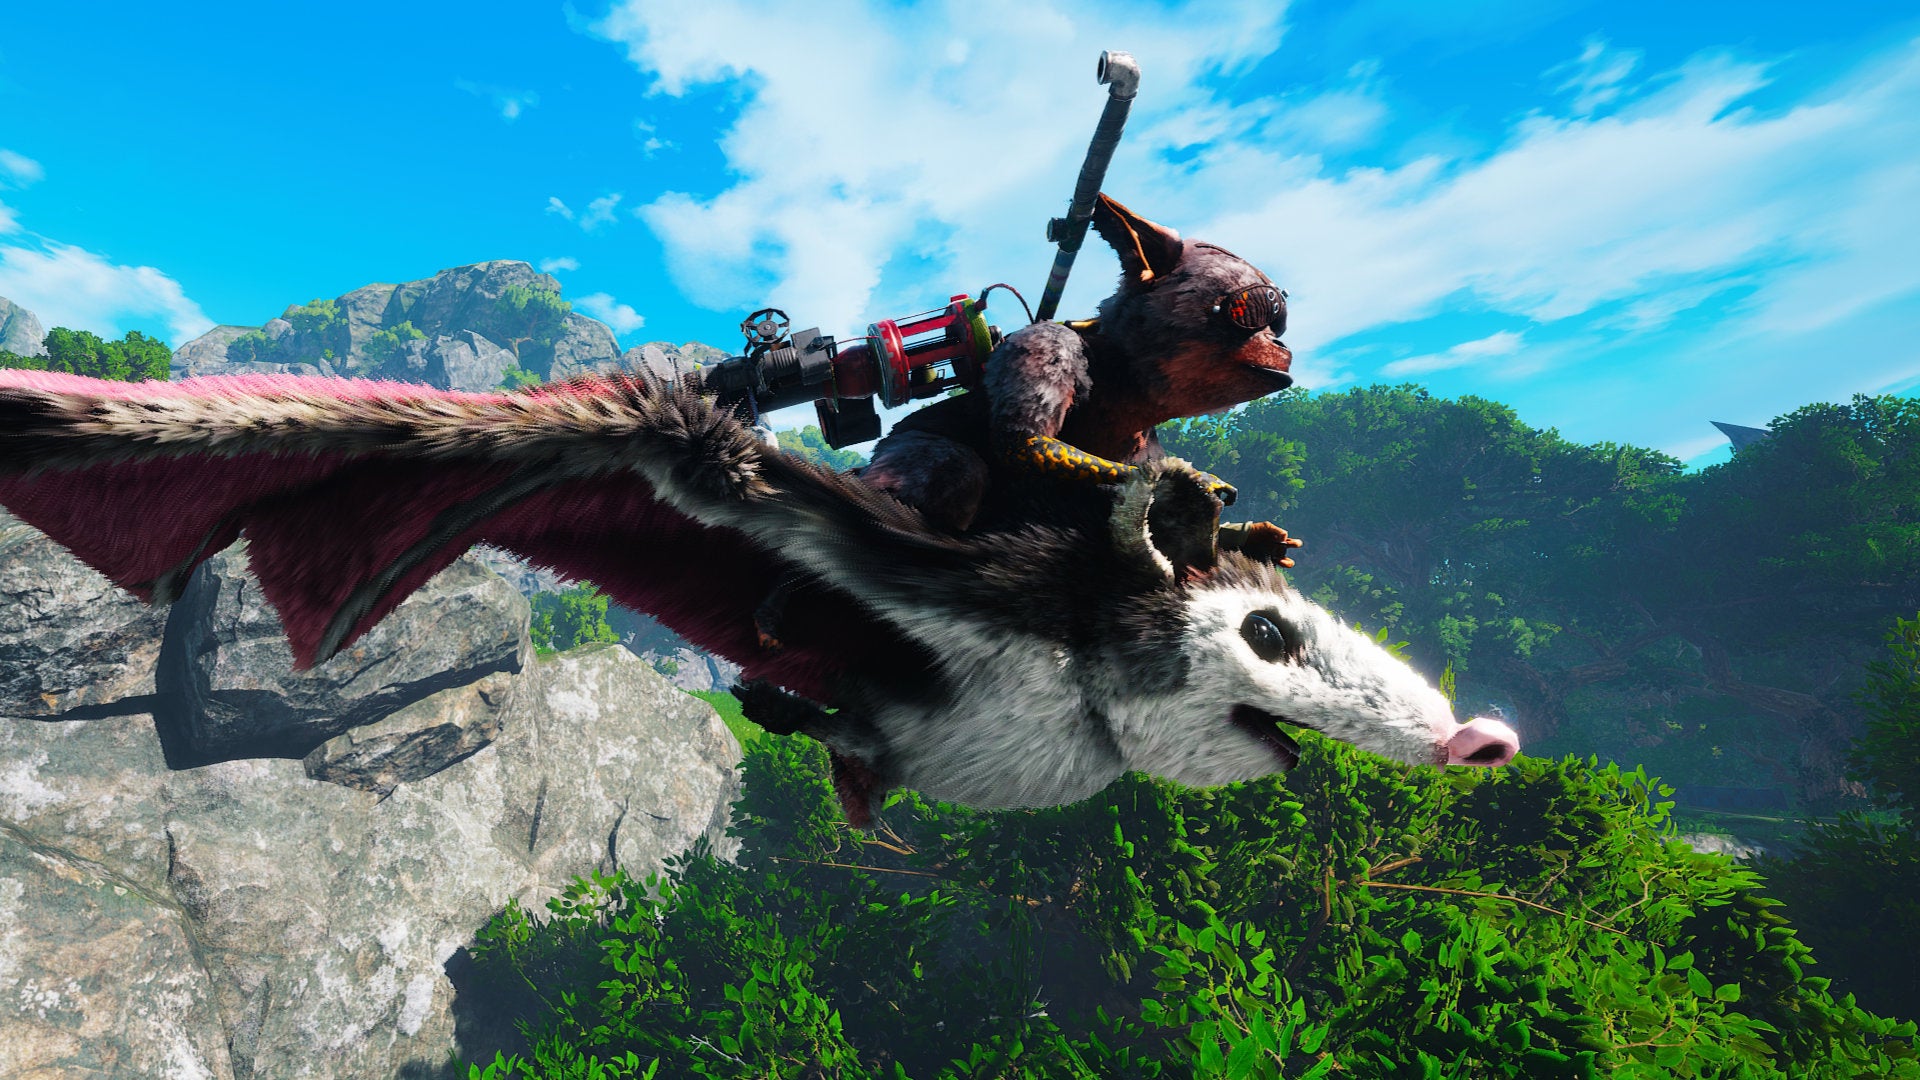 If it's news to you that there's a flying mount in Biomutant, you're not alone. It's very possible to complete the game and never find out about Batna